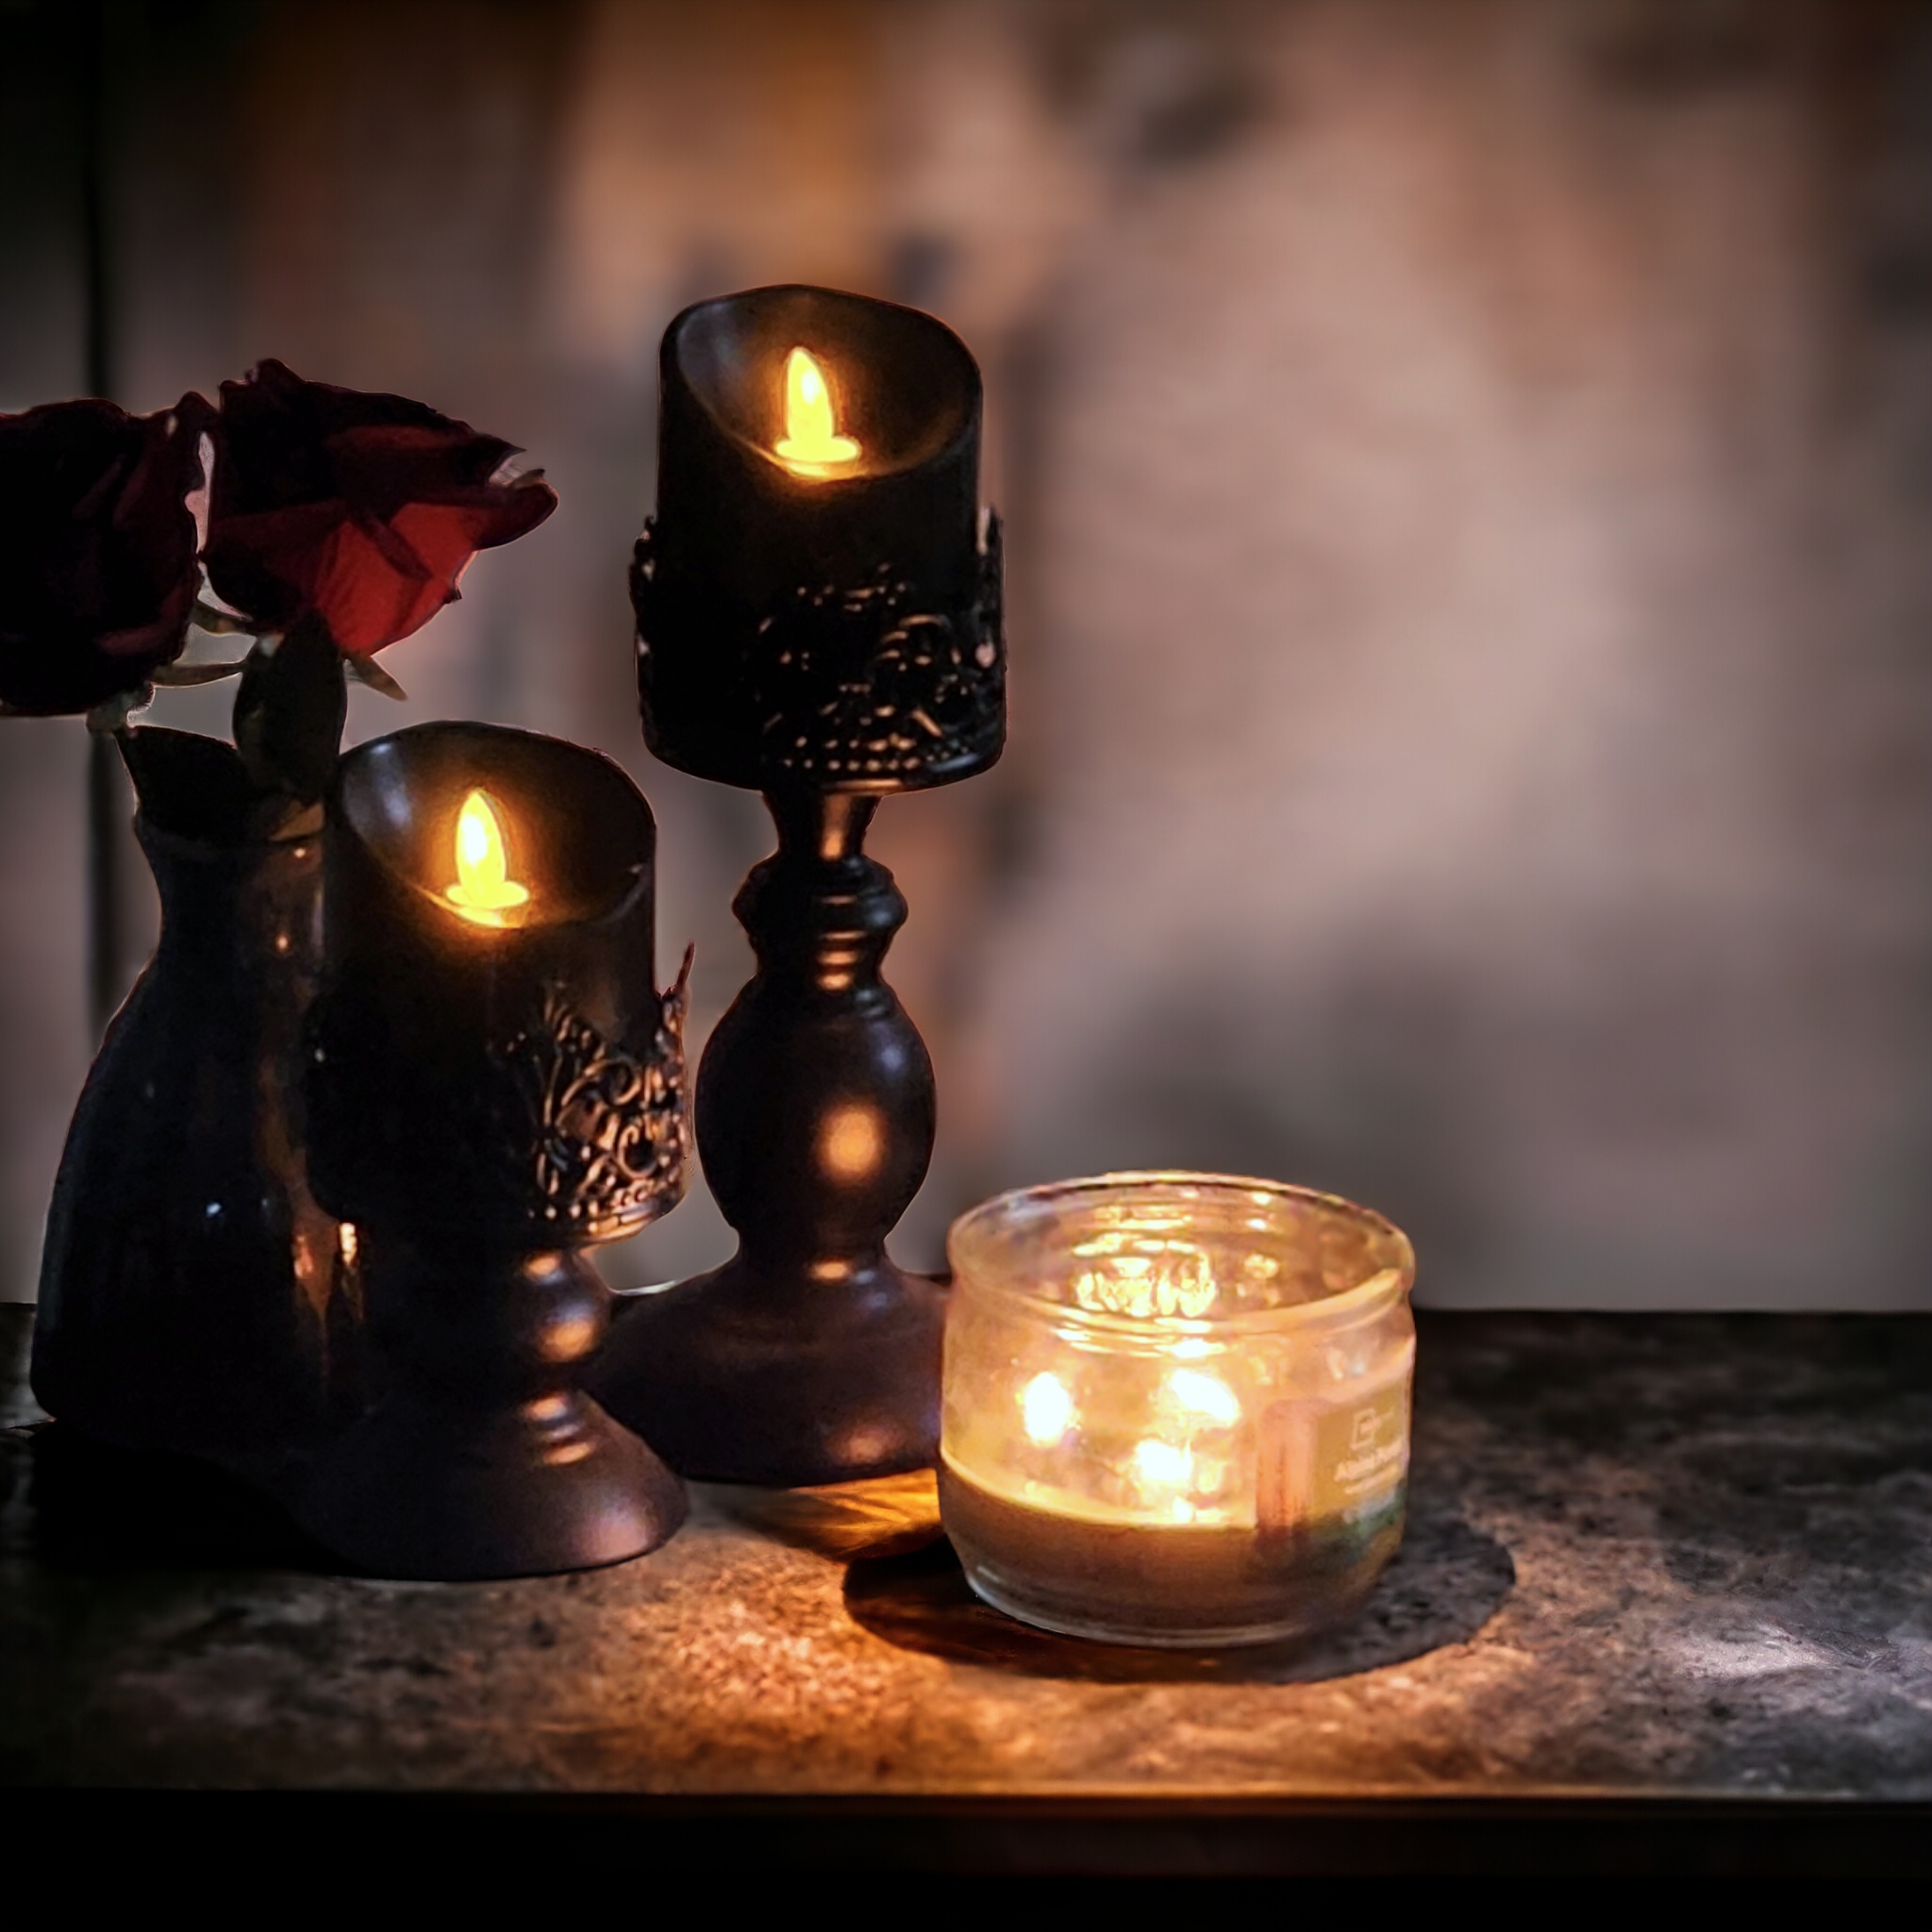 Gothika’s New Flameless Candle Technology Takes the Market by Storm With Revolutionary Flameless Candle Technology